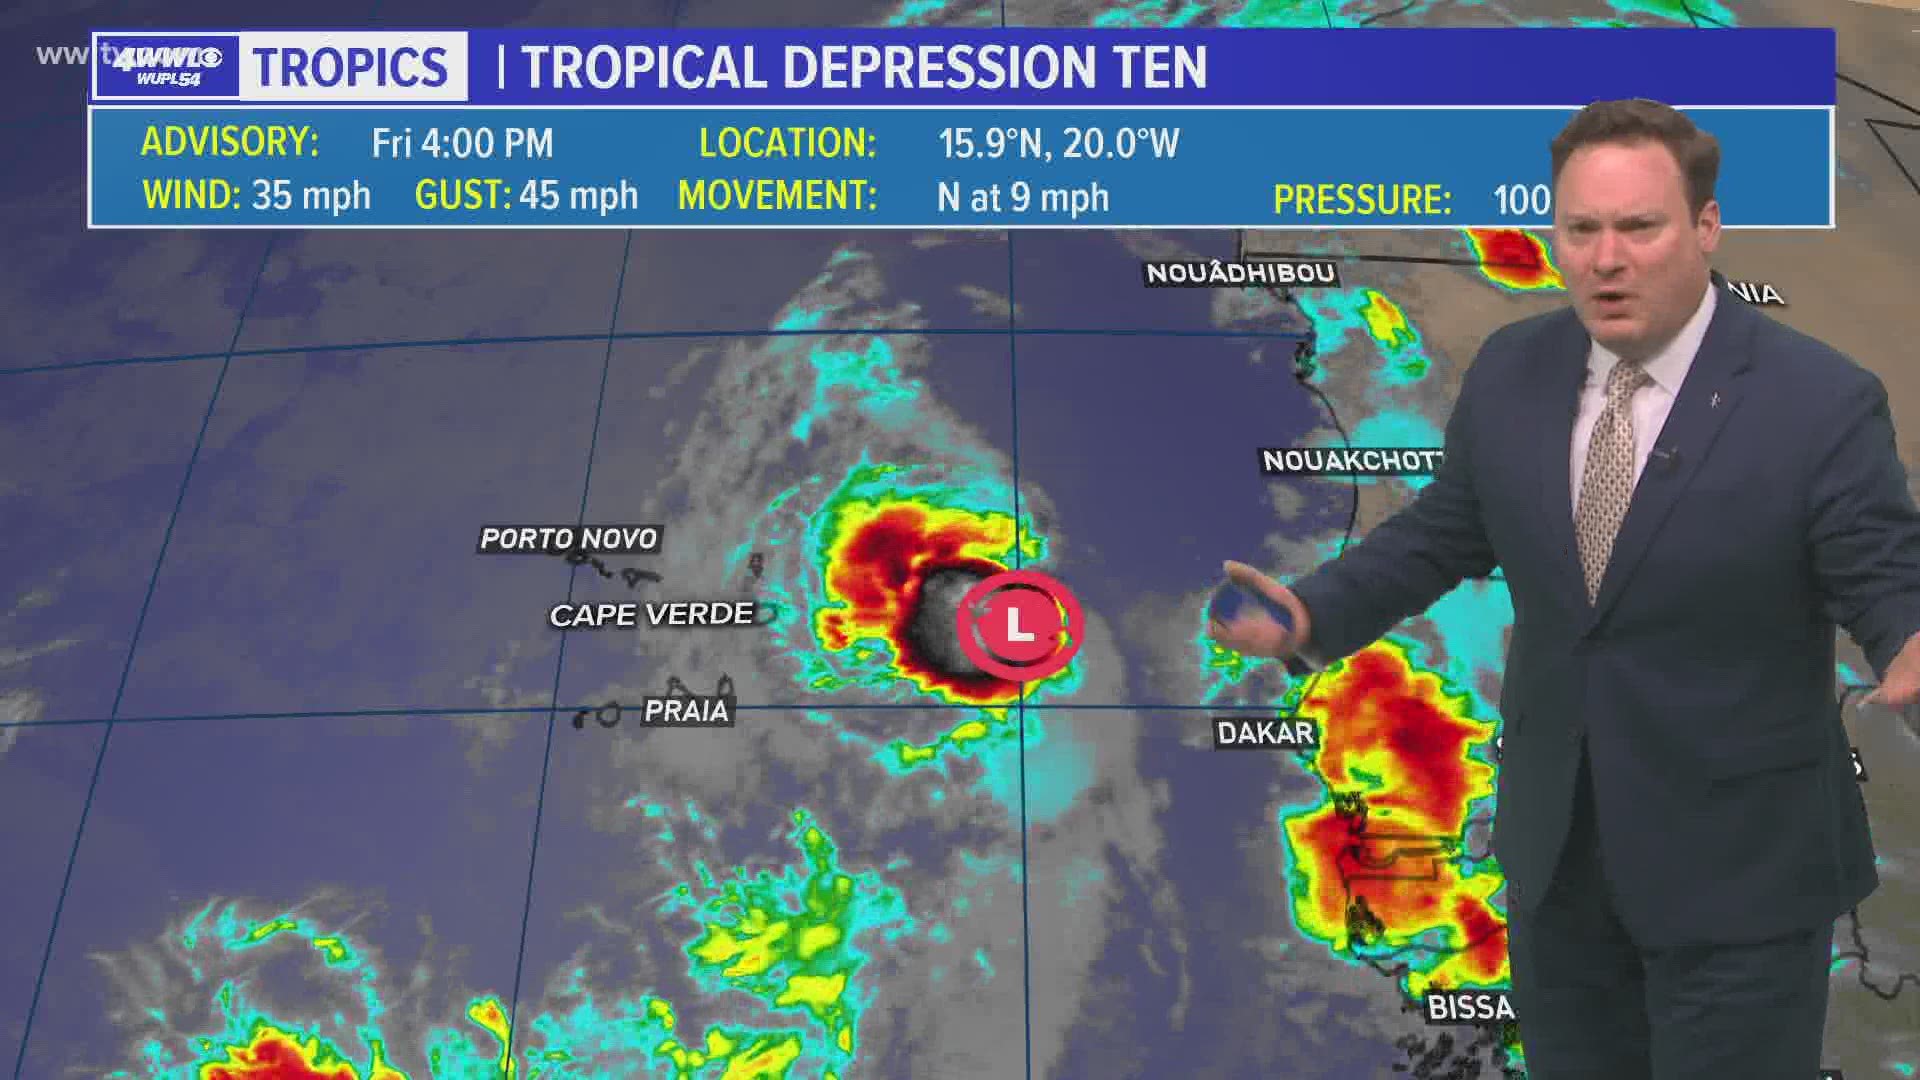 Chief Meteorologist Chris Franklin has a detailed look at the forecast for Hurricane Isaias, newly designated Tropical Depression 10, and another tropical wave.